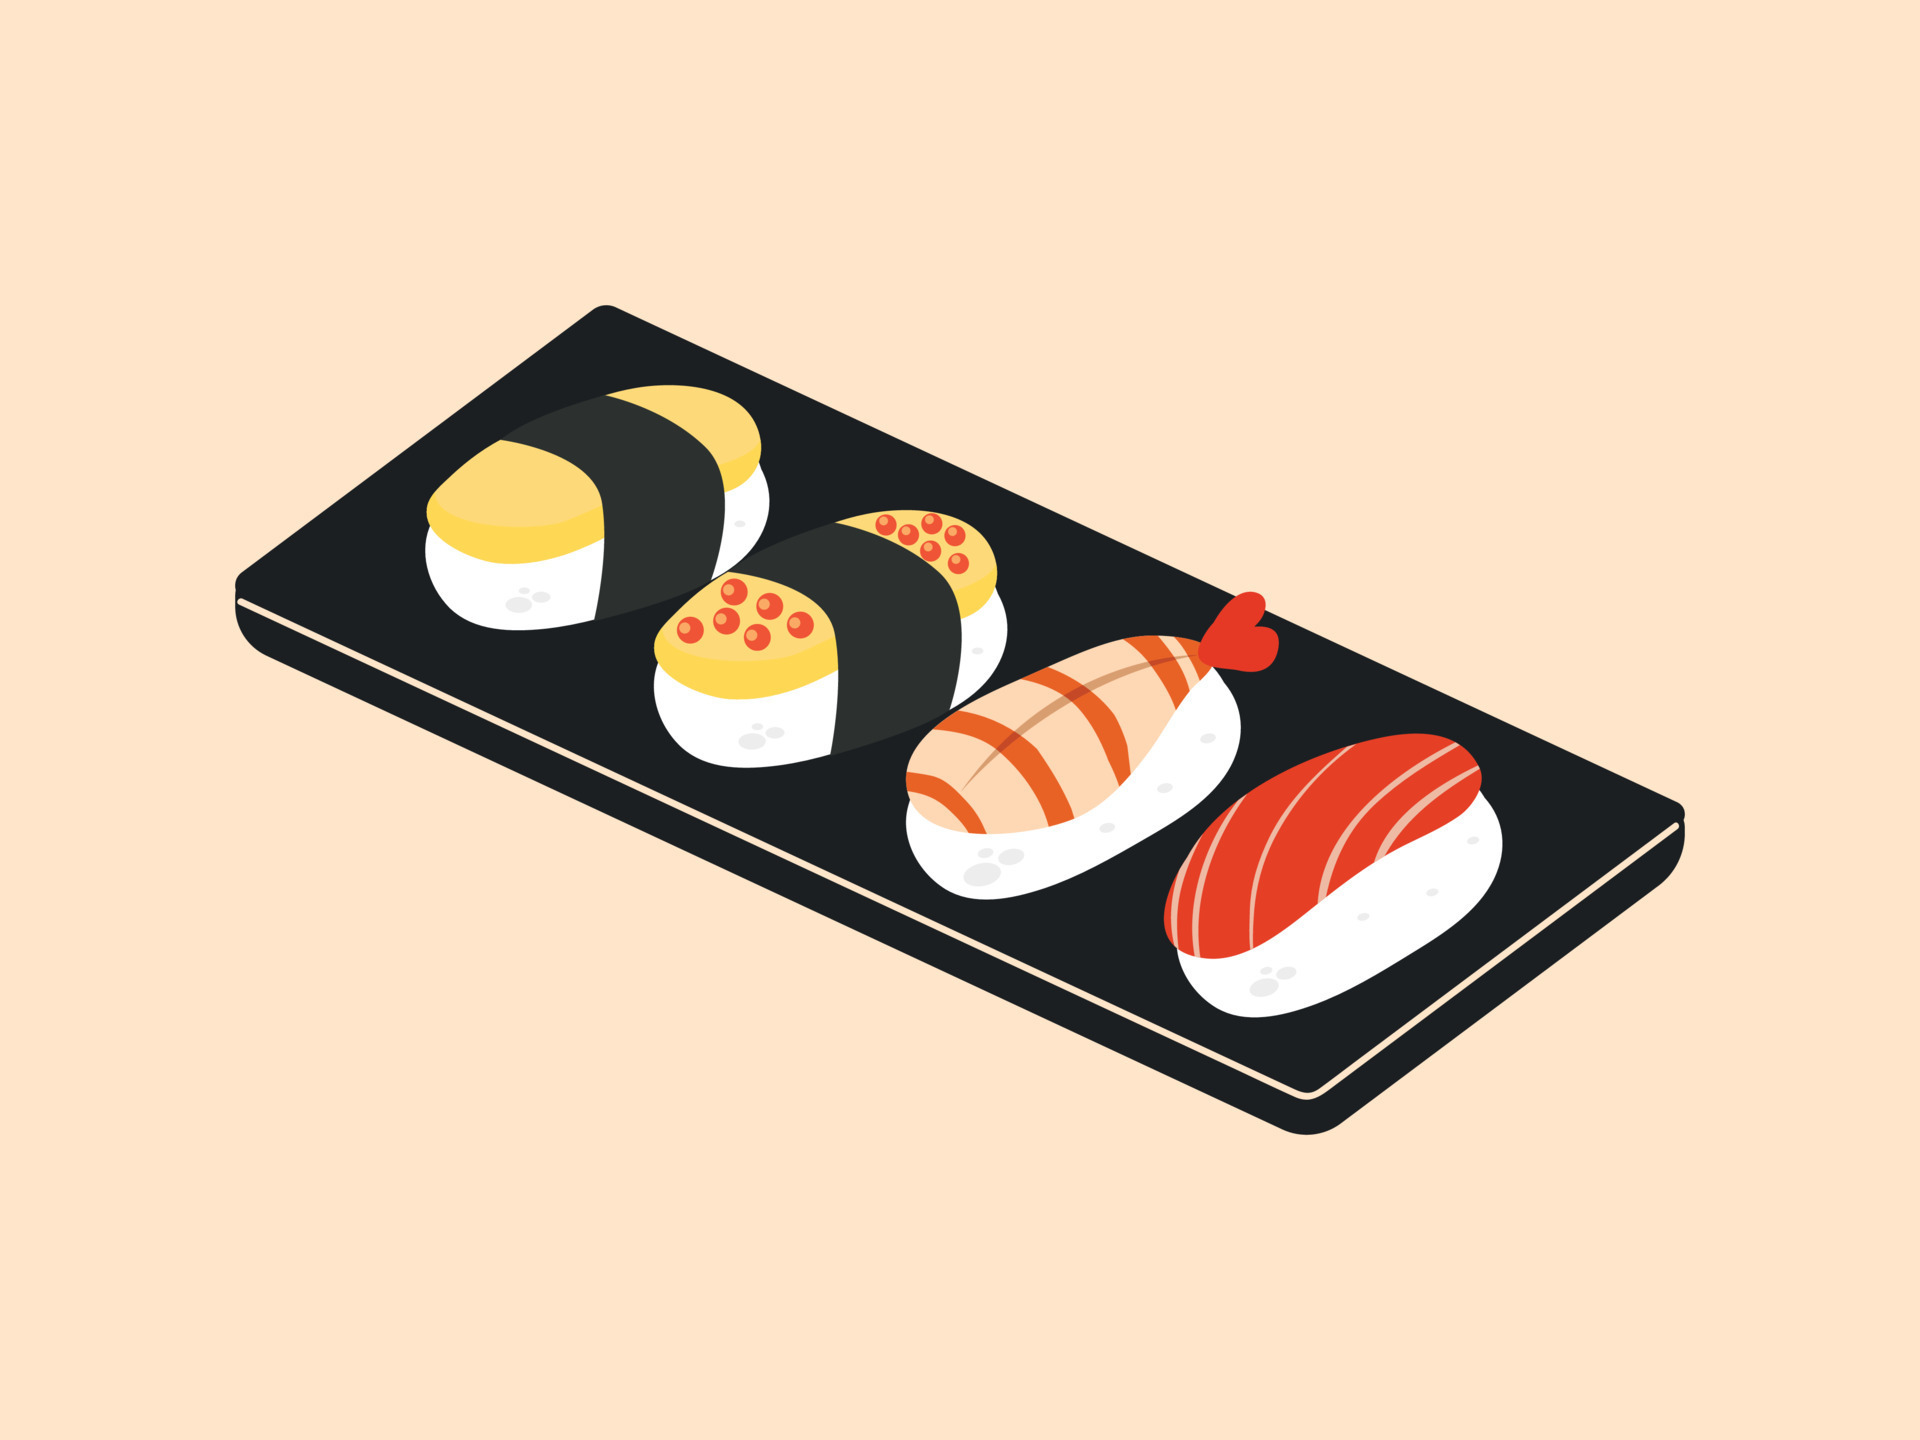 https://static.vecteezy.com/system/resources/previews/018/768/826/original/japanese-food-sushi-on-wooden-board-with-sushi-chopsticks-free-vector.jpg